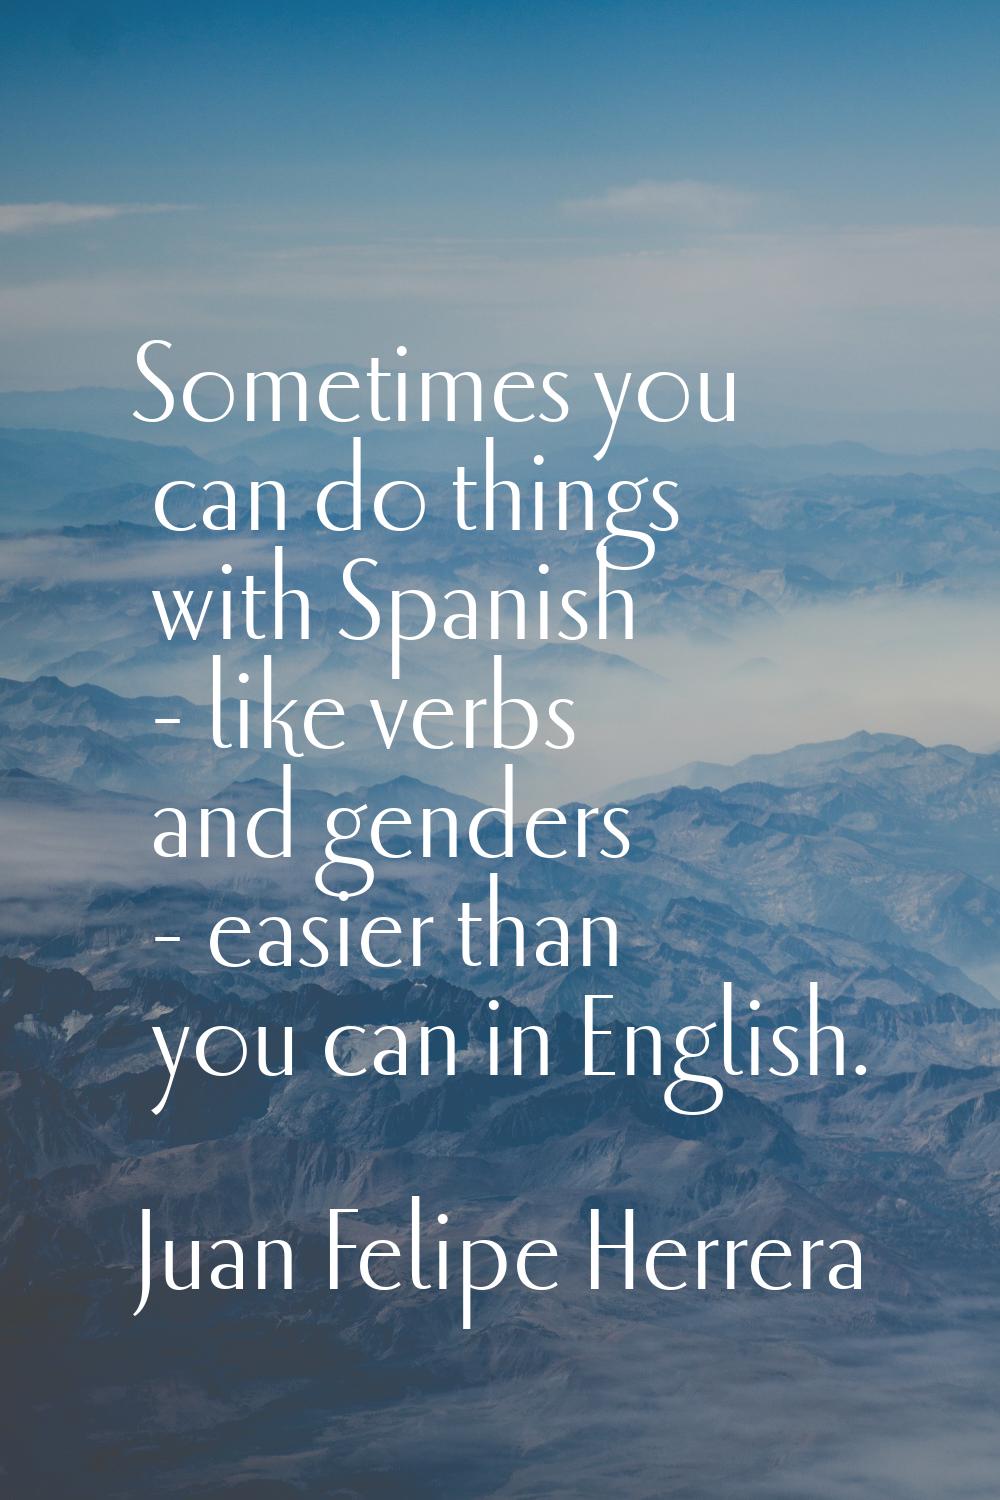 Sometimes you can do things with Spanish - like verbs and genders - easier than you can in English.